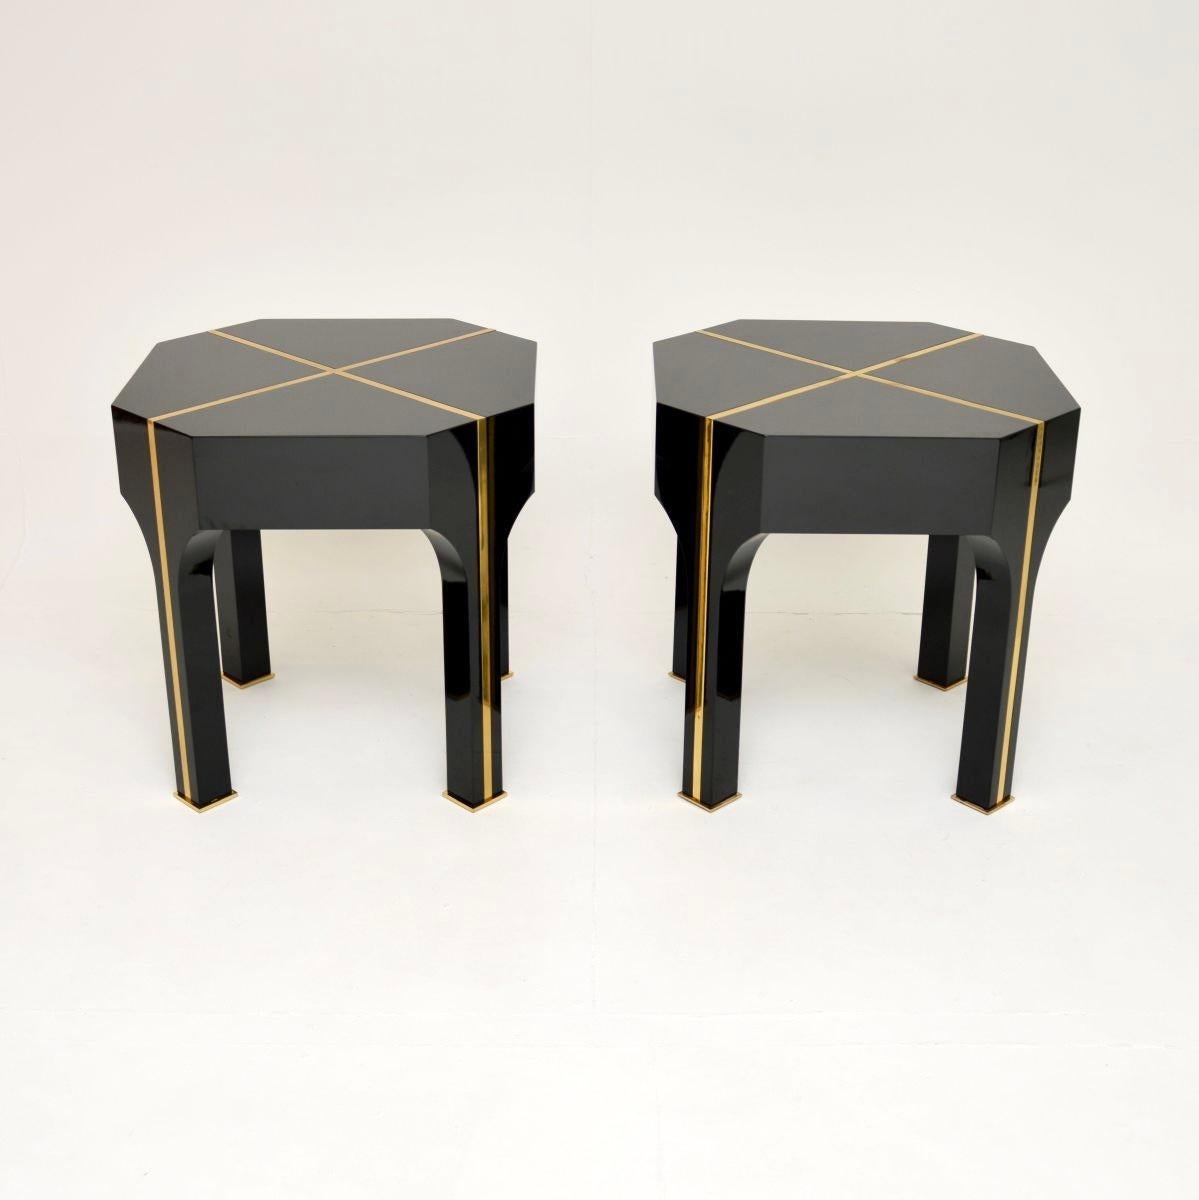 A fantastic pair of vintage Italian brass inlaid side tables, dating from around the 1970-80’s.

The quality is outstanding, they are large, impressive and extremely well made. They are made from black laminate with inlaid solid brass strips and